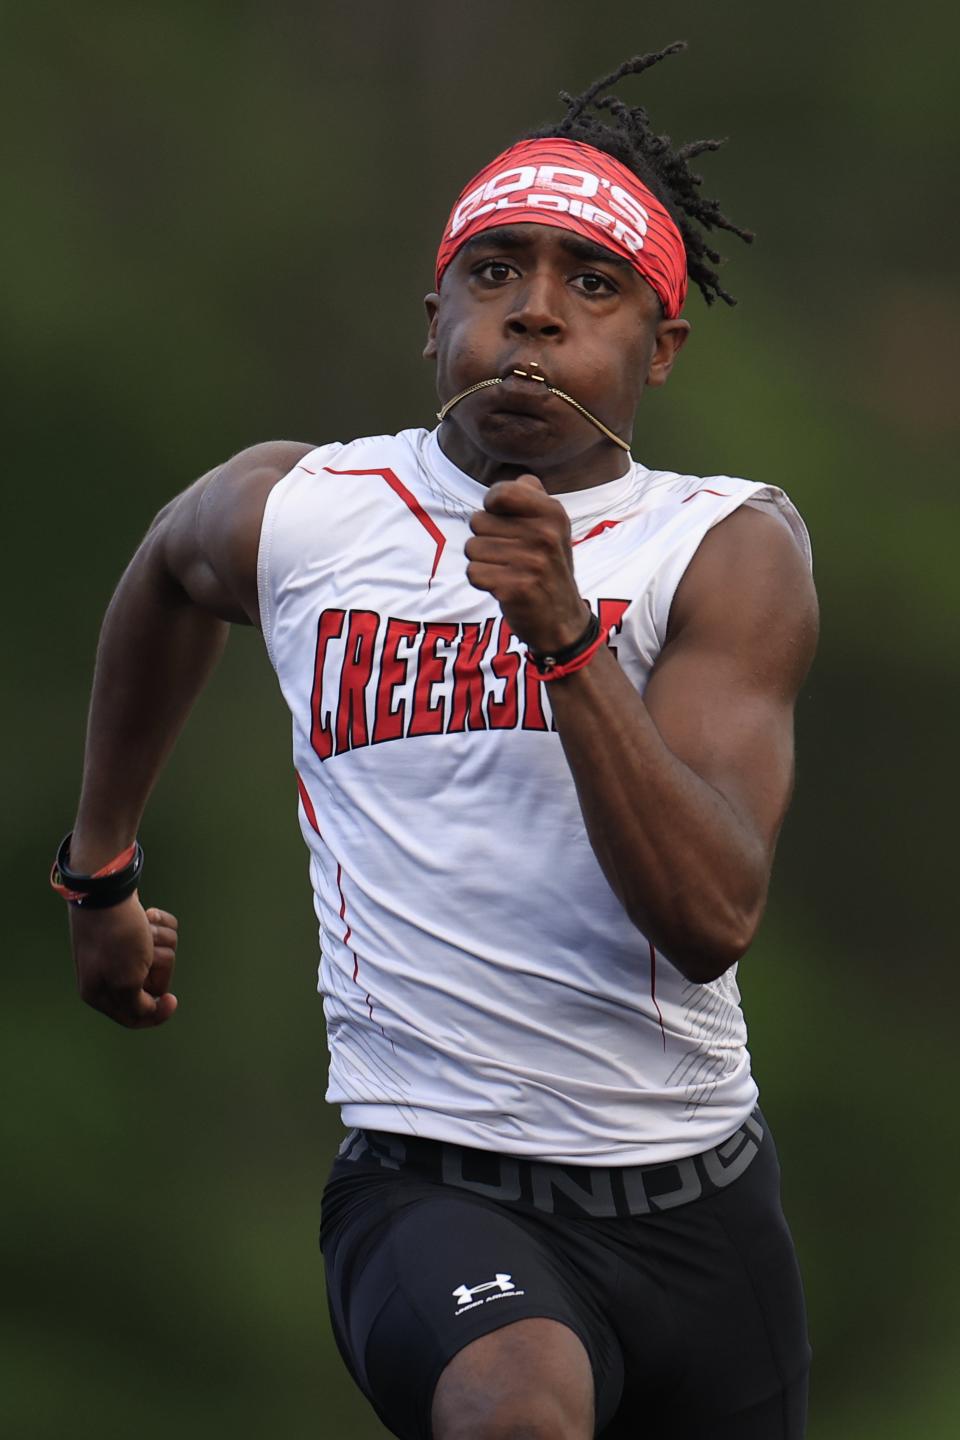 Creekside's Christian Miller has won consecutive Class 2A state sprint championships.